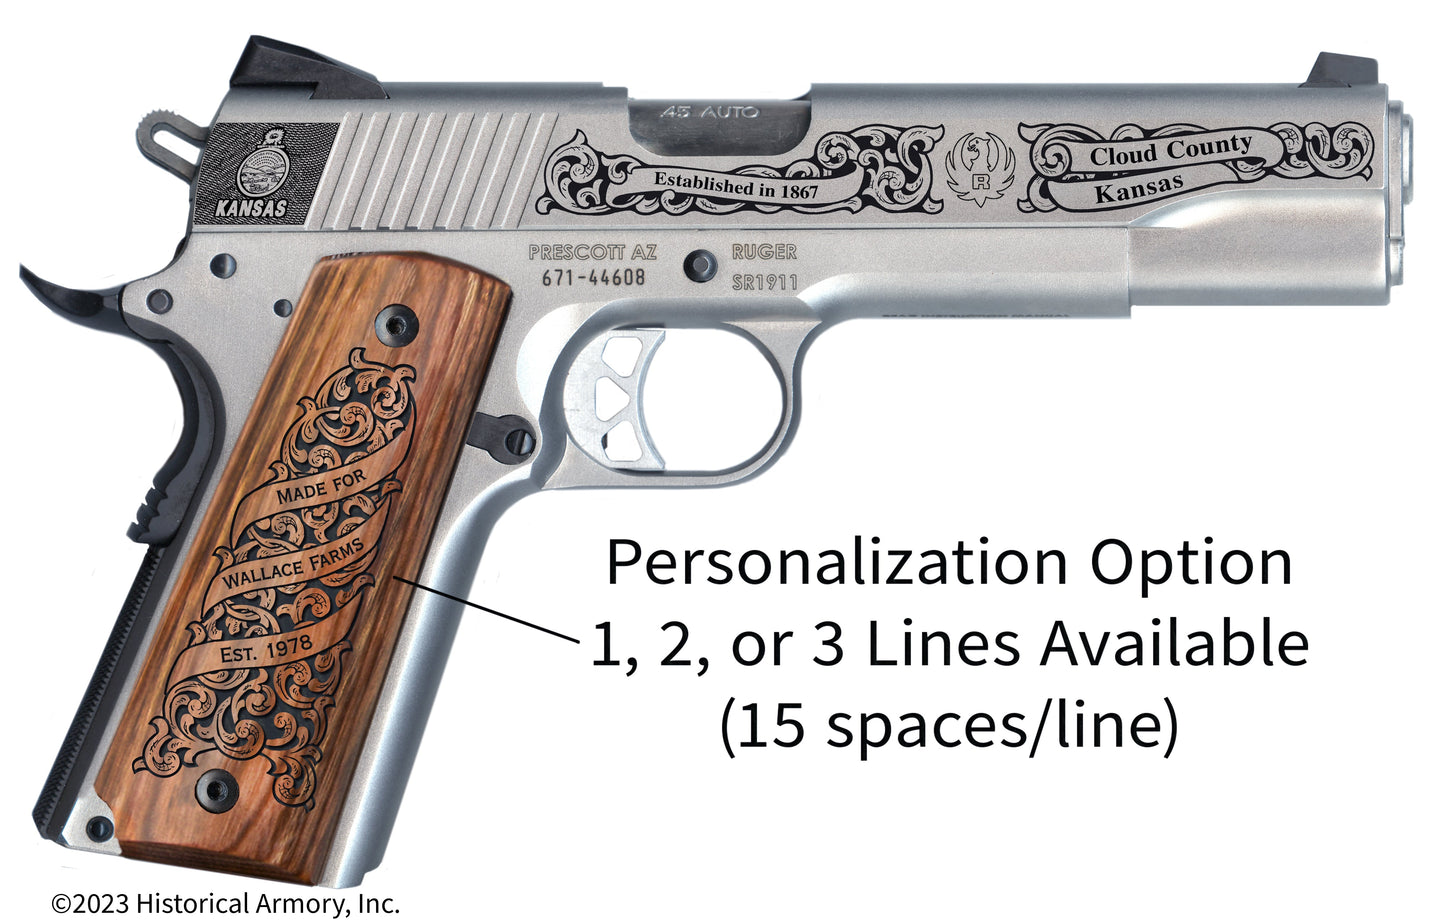 Cloud County Kansas Personalized Engraved .45 Auto Ruger 1911